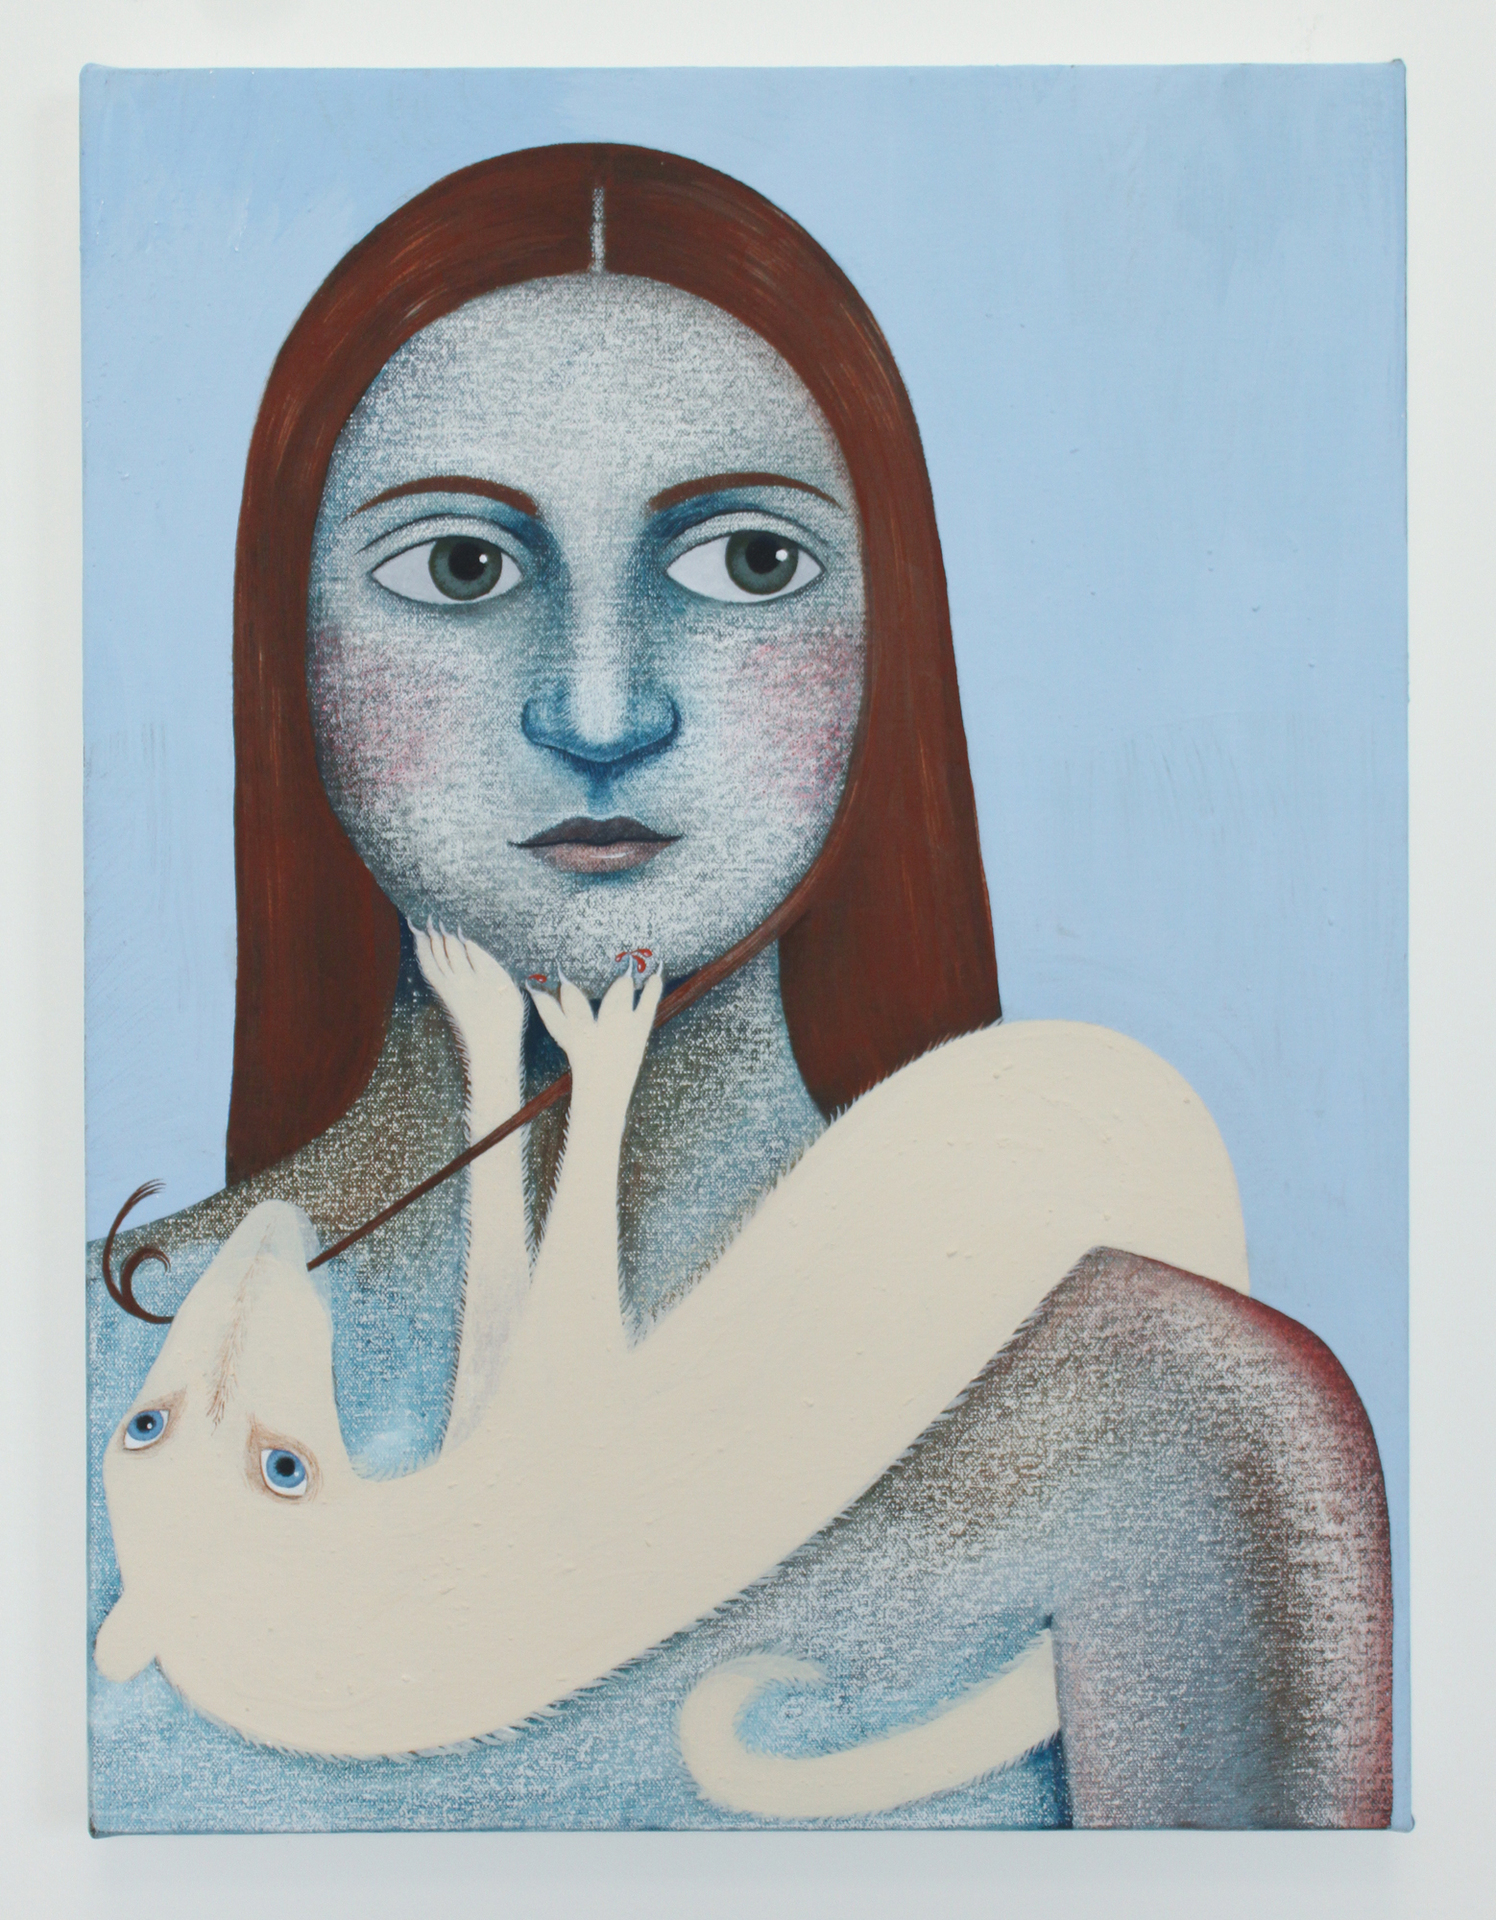 Sara Anstis, Ermine, Acrylic on canvas mounted on board, 16 x 12 in.